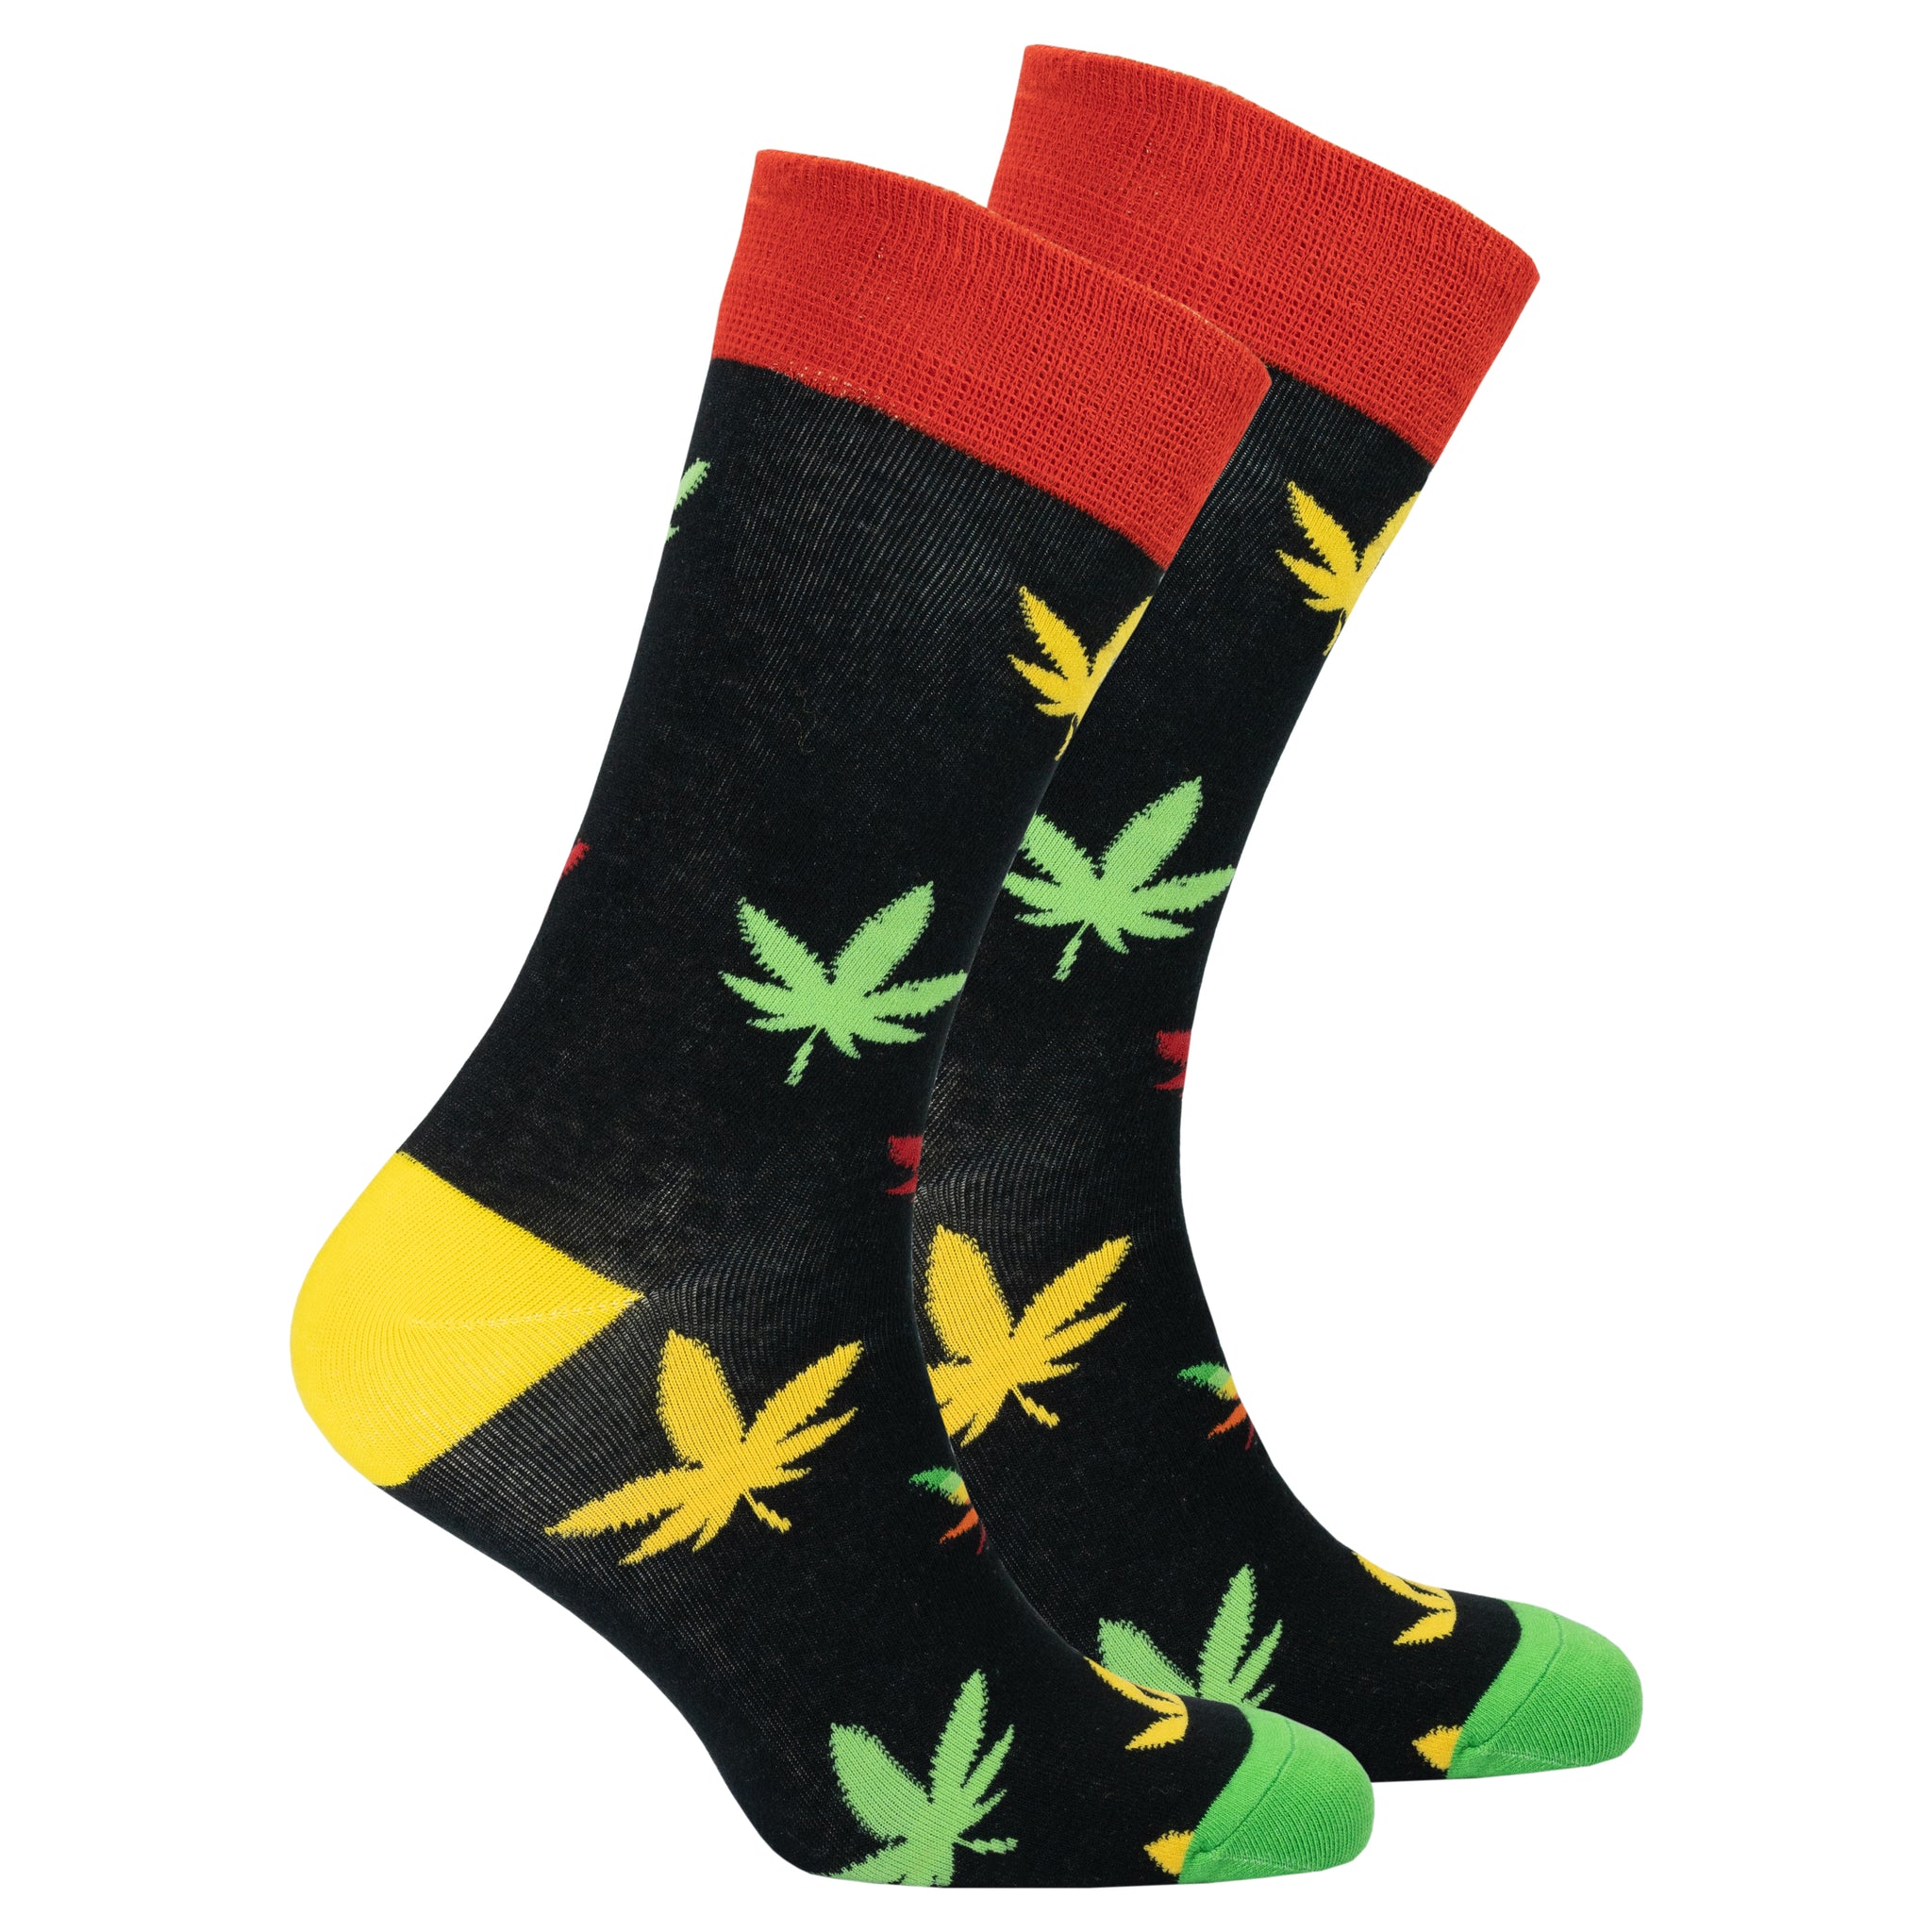 Men's Colorful Weed Socks black, yellow and green